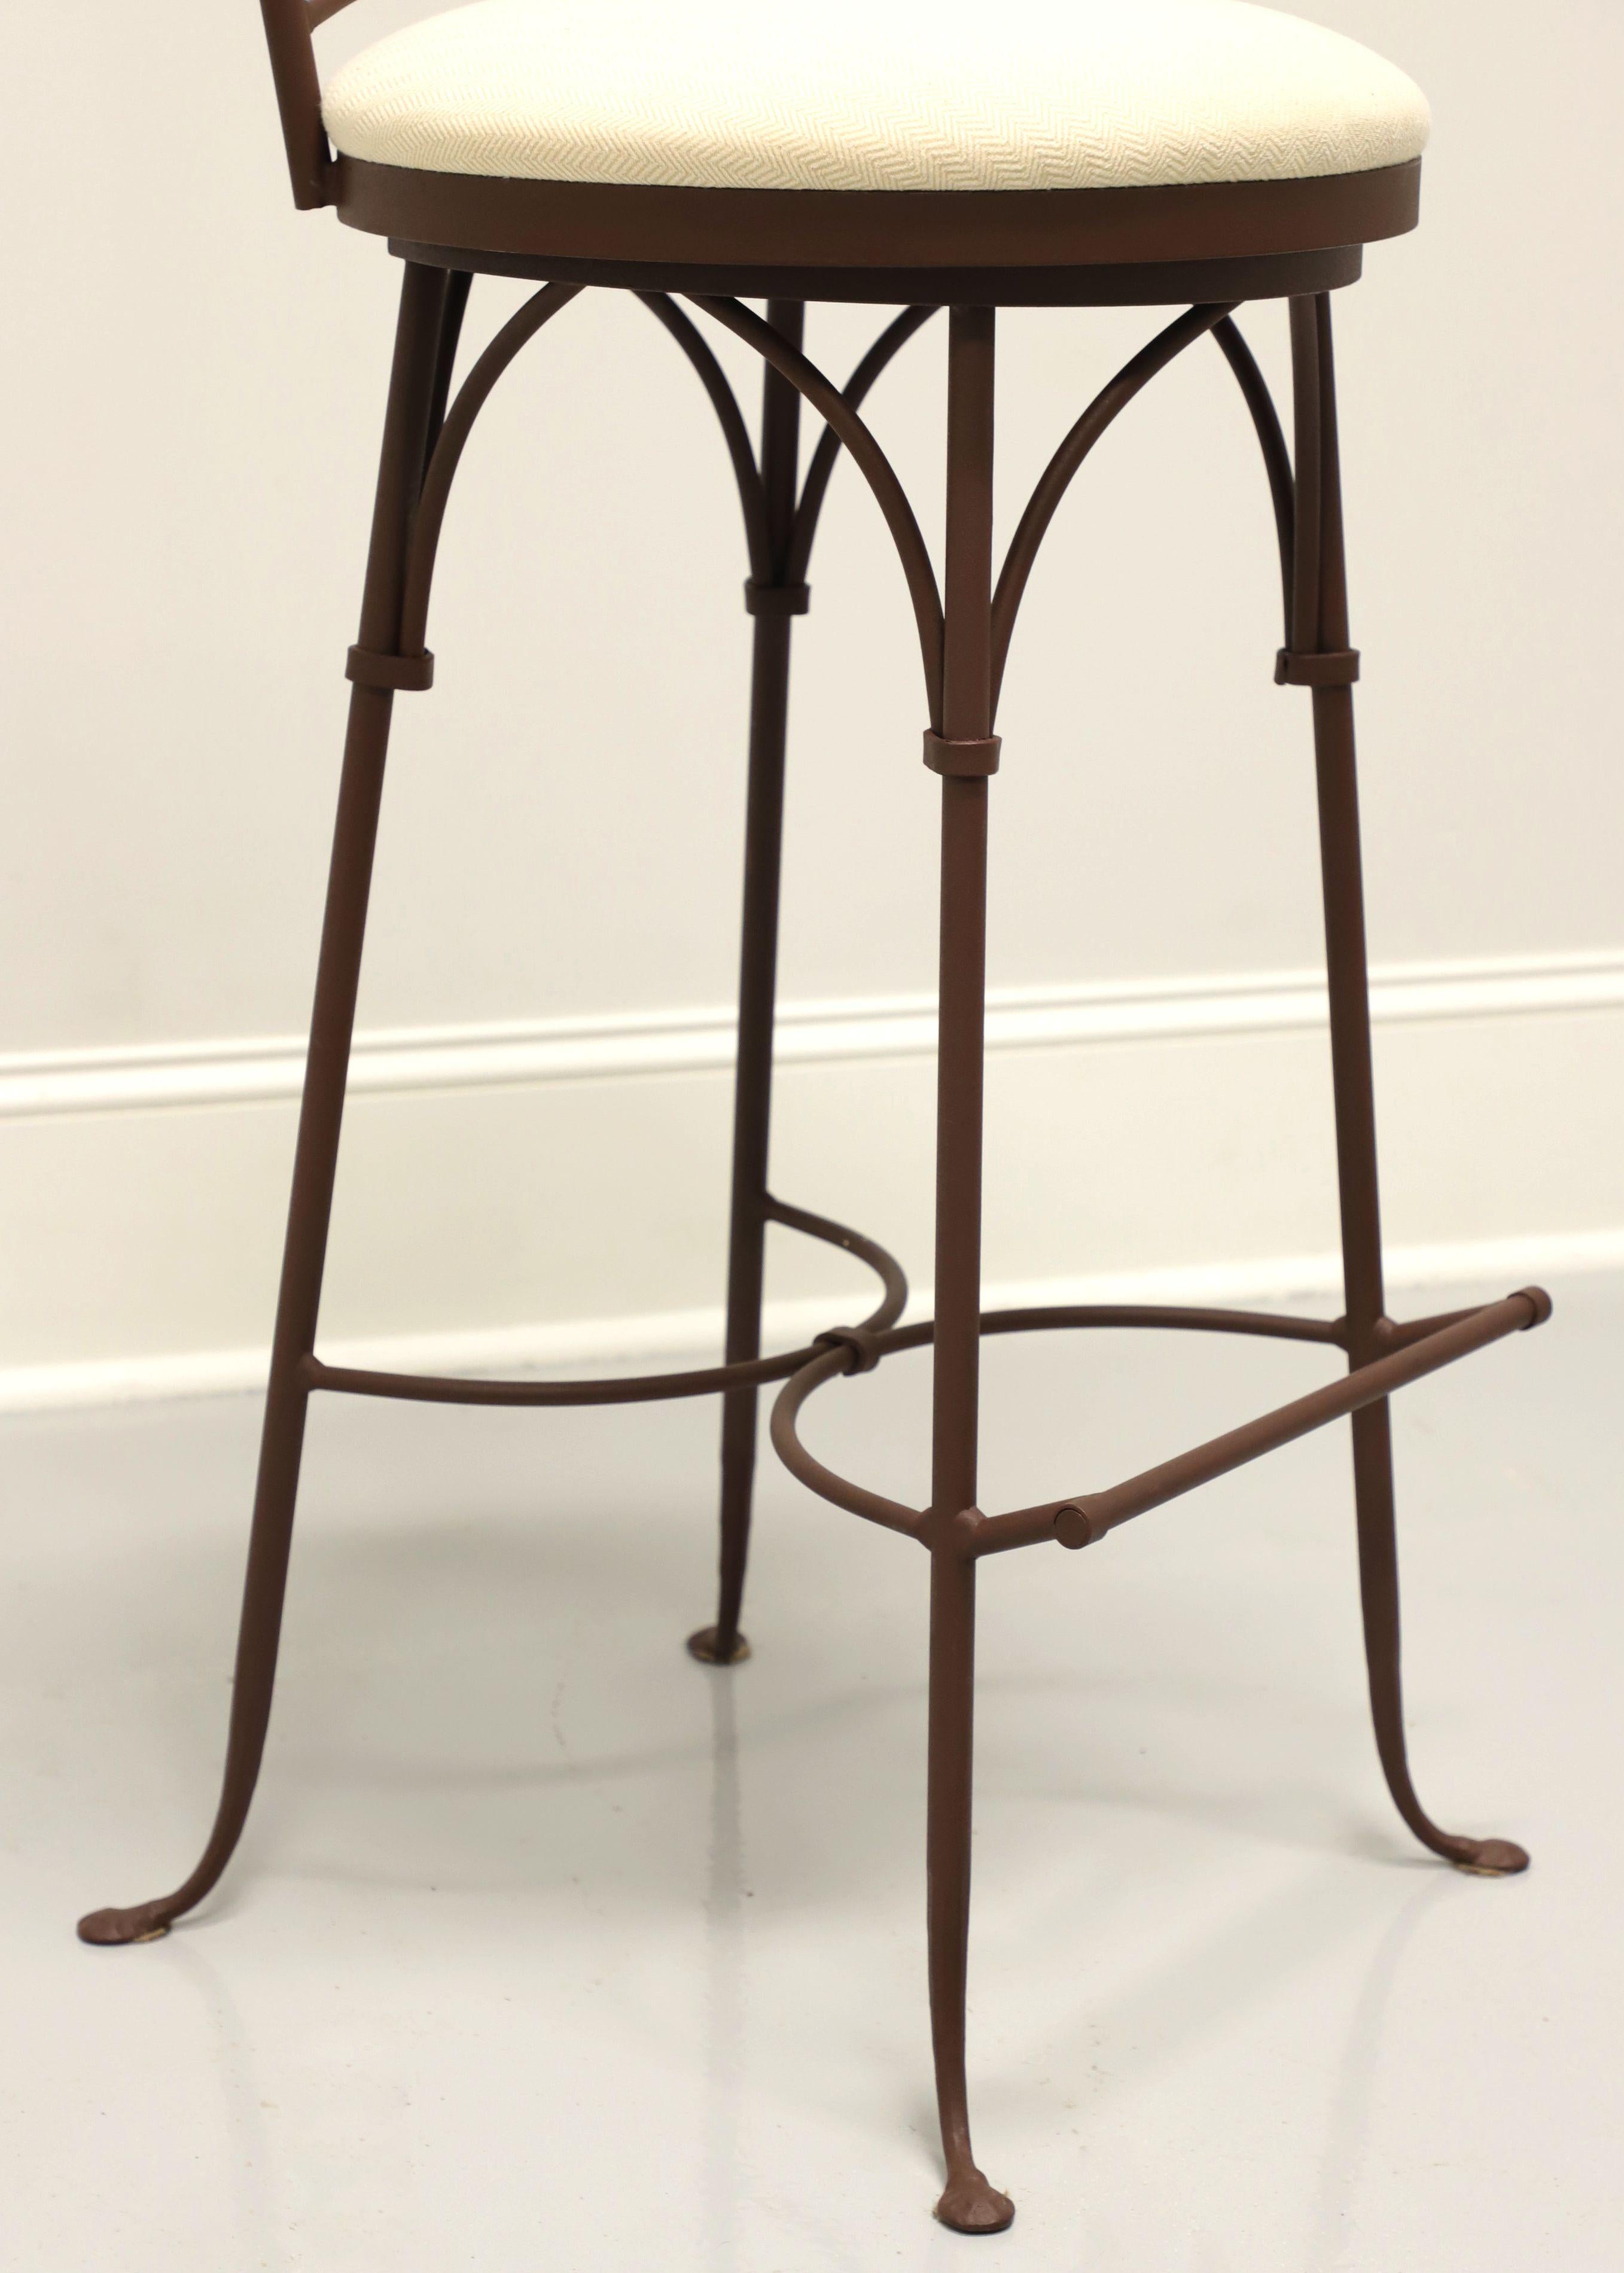 CHARLESTON FORGE Wrought Iron Shaker Arch Bar Height Swivel Stools - Pair A In Good Condition For Sale In Charlotte, NC